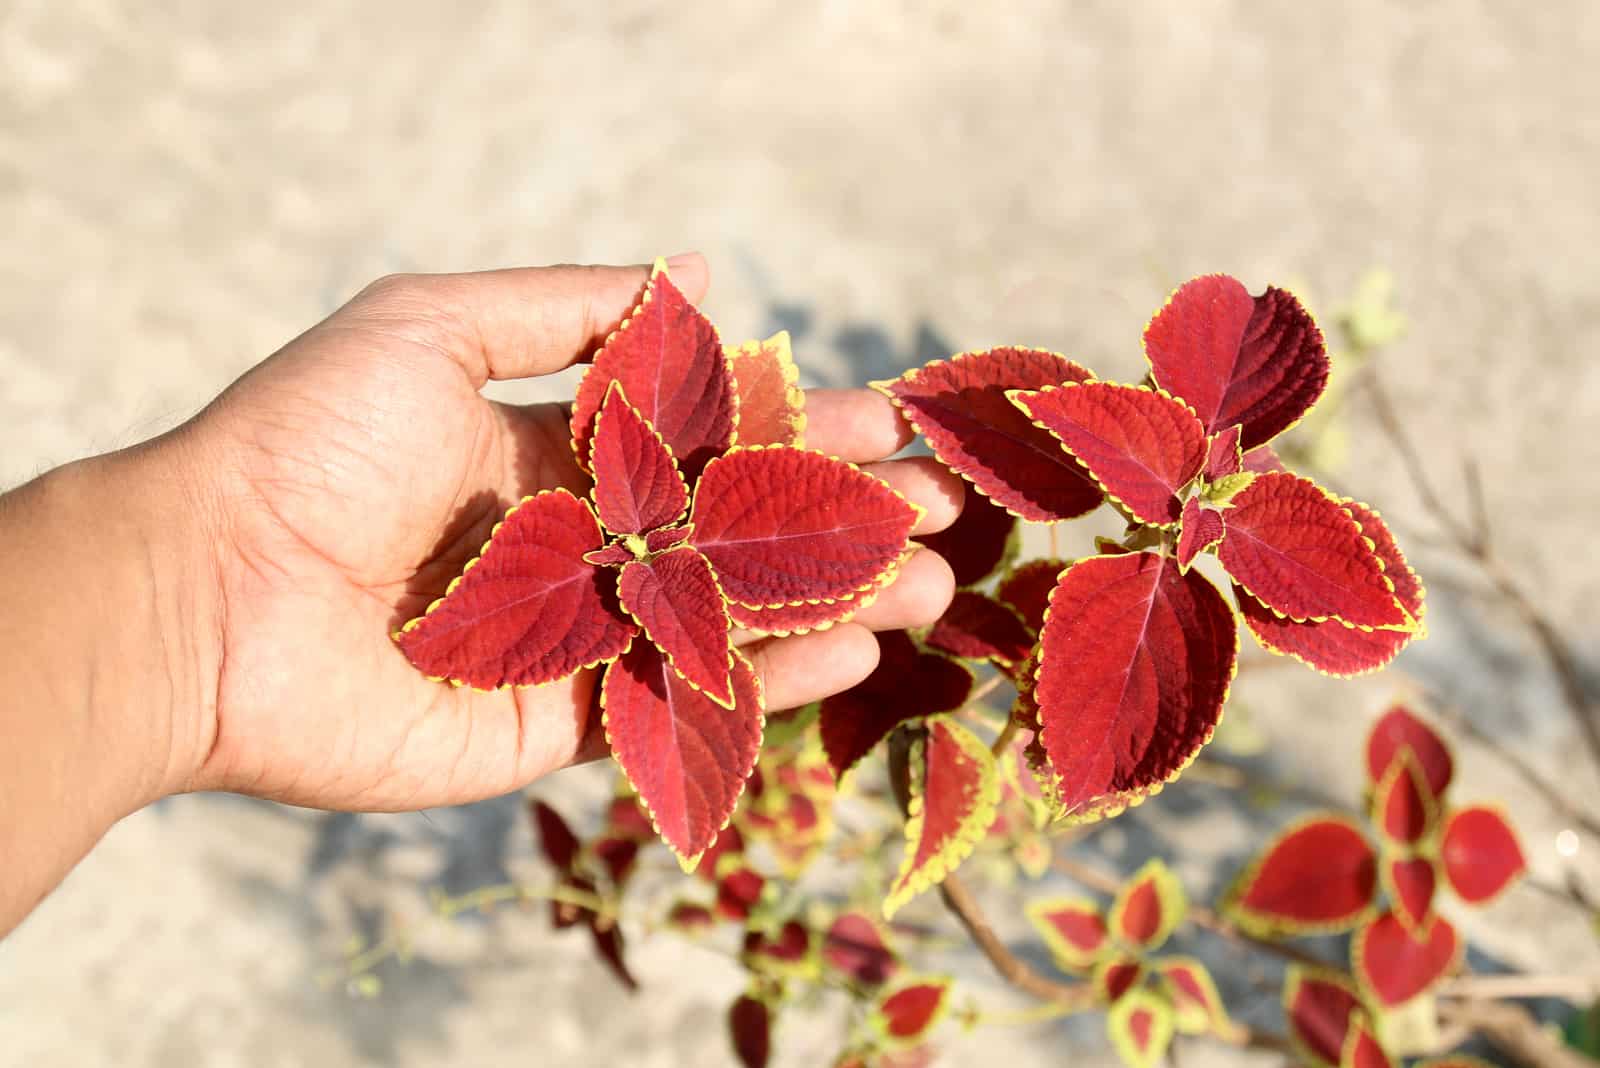 A List Of Plants With Red Leaves (+ Red & Green Leaf Cultivars)